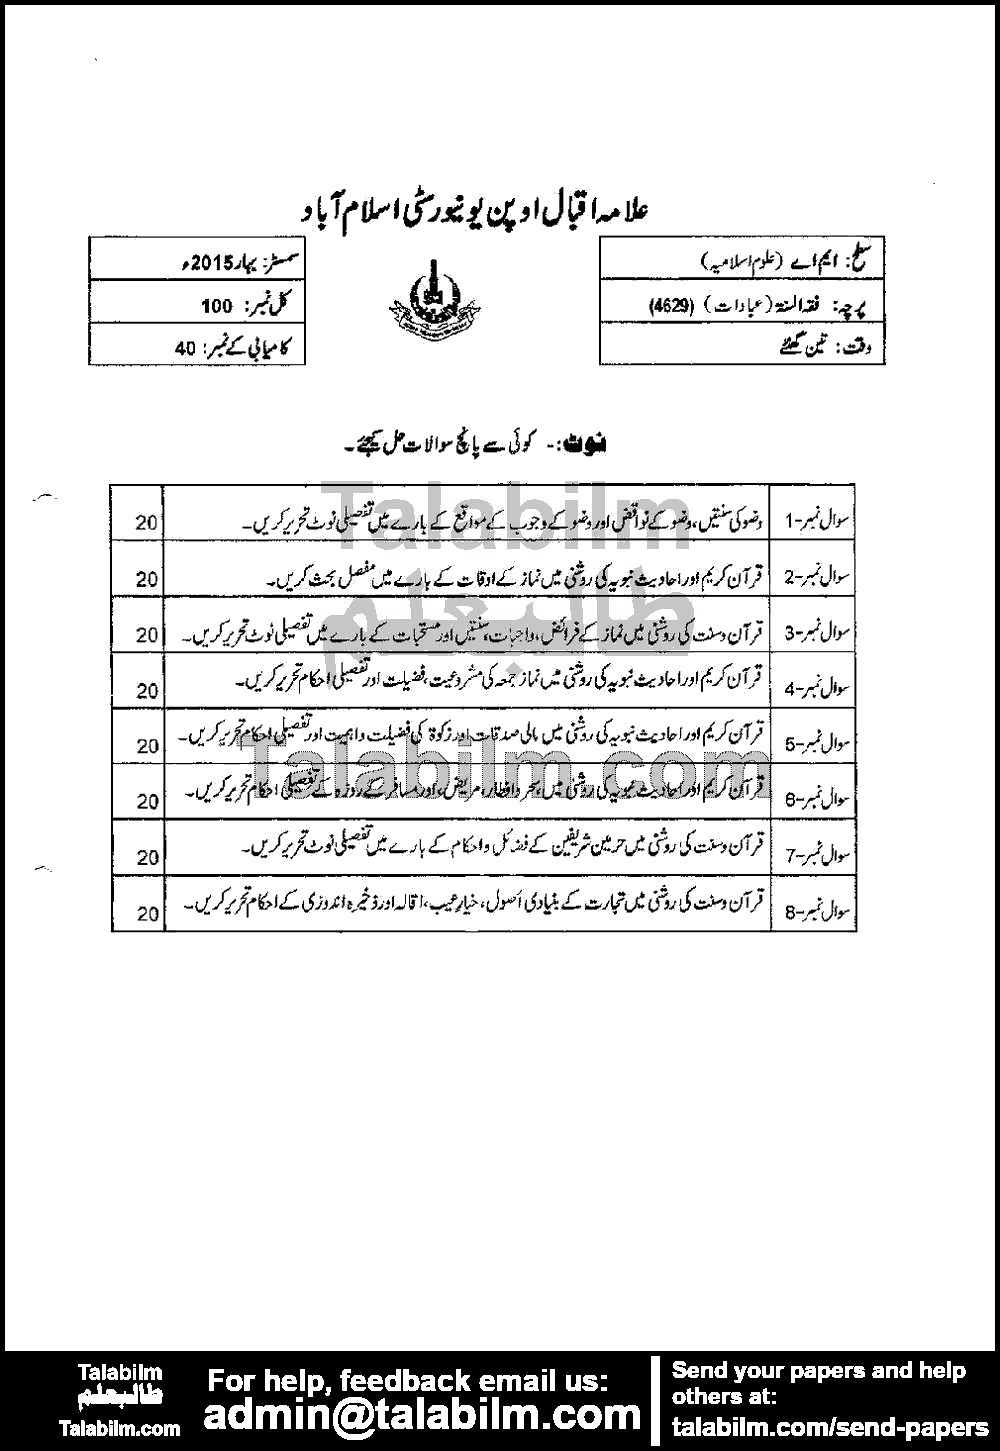 Fiqa-ul-Sunnah (Ibadat) 4629 past paper for Spring 2015